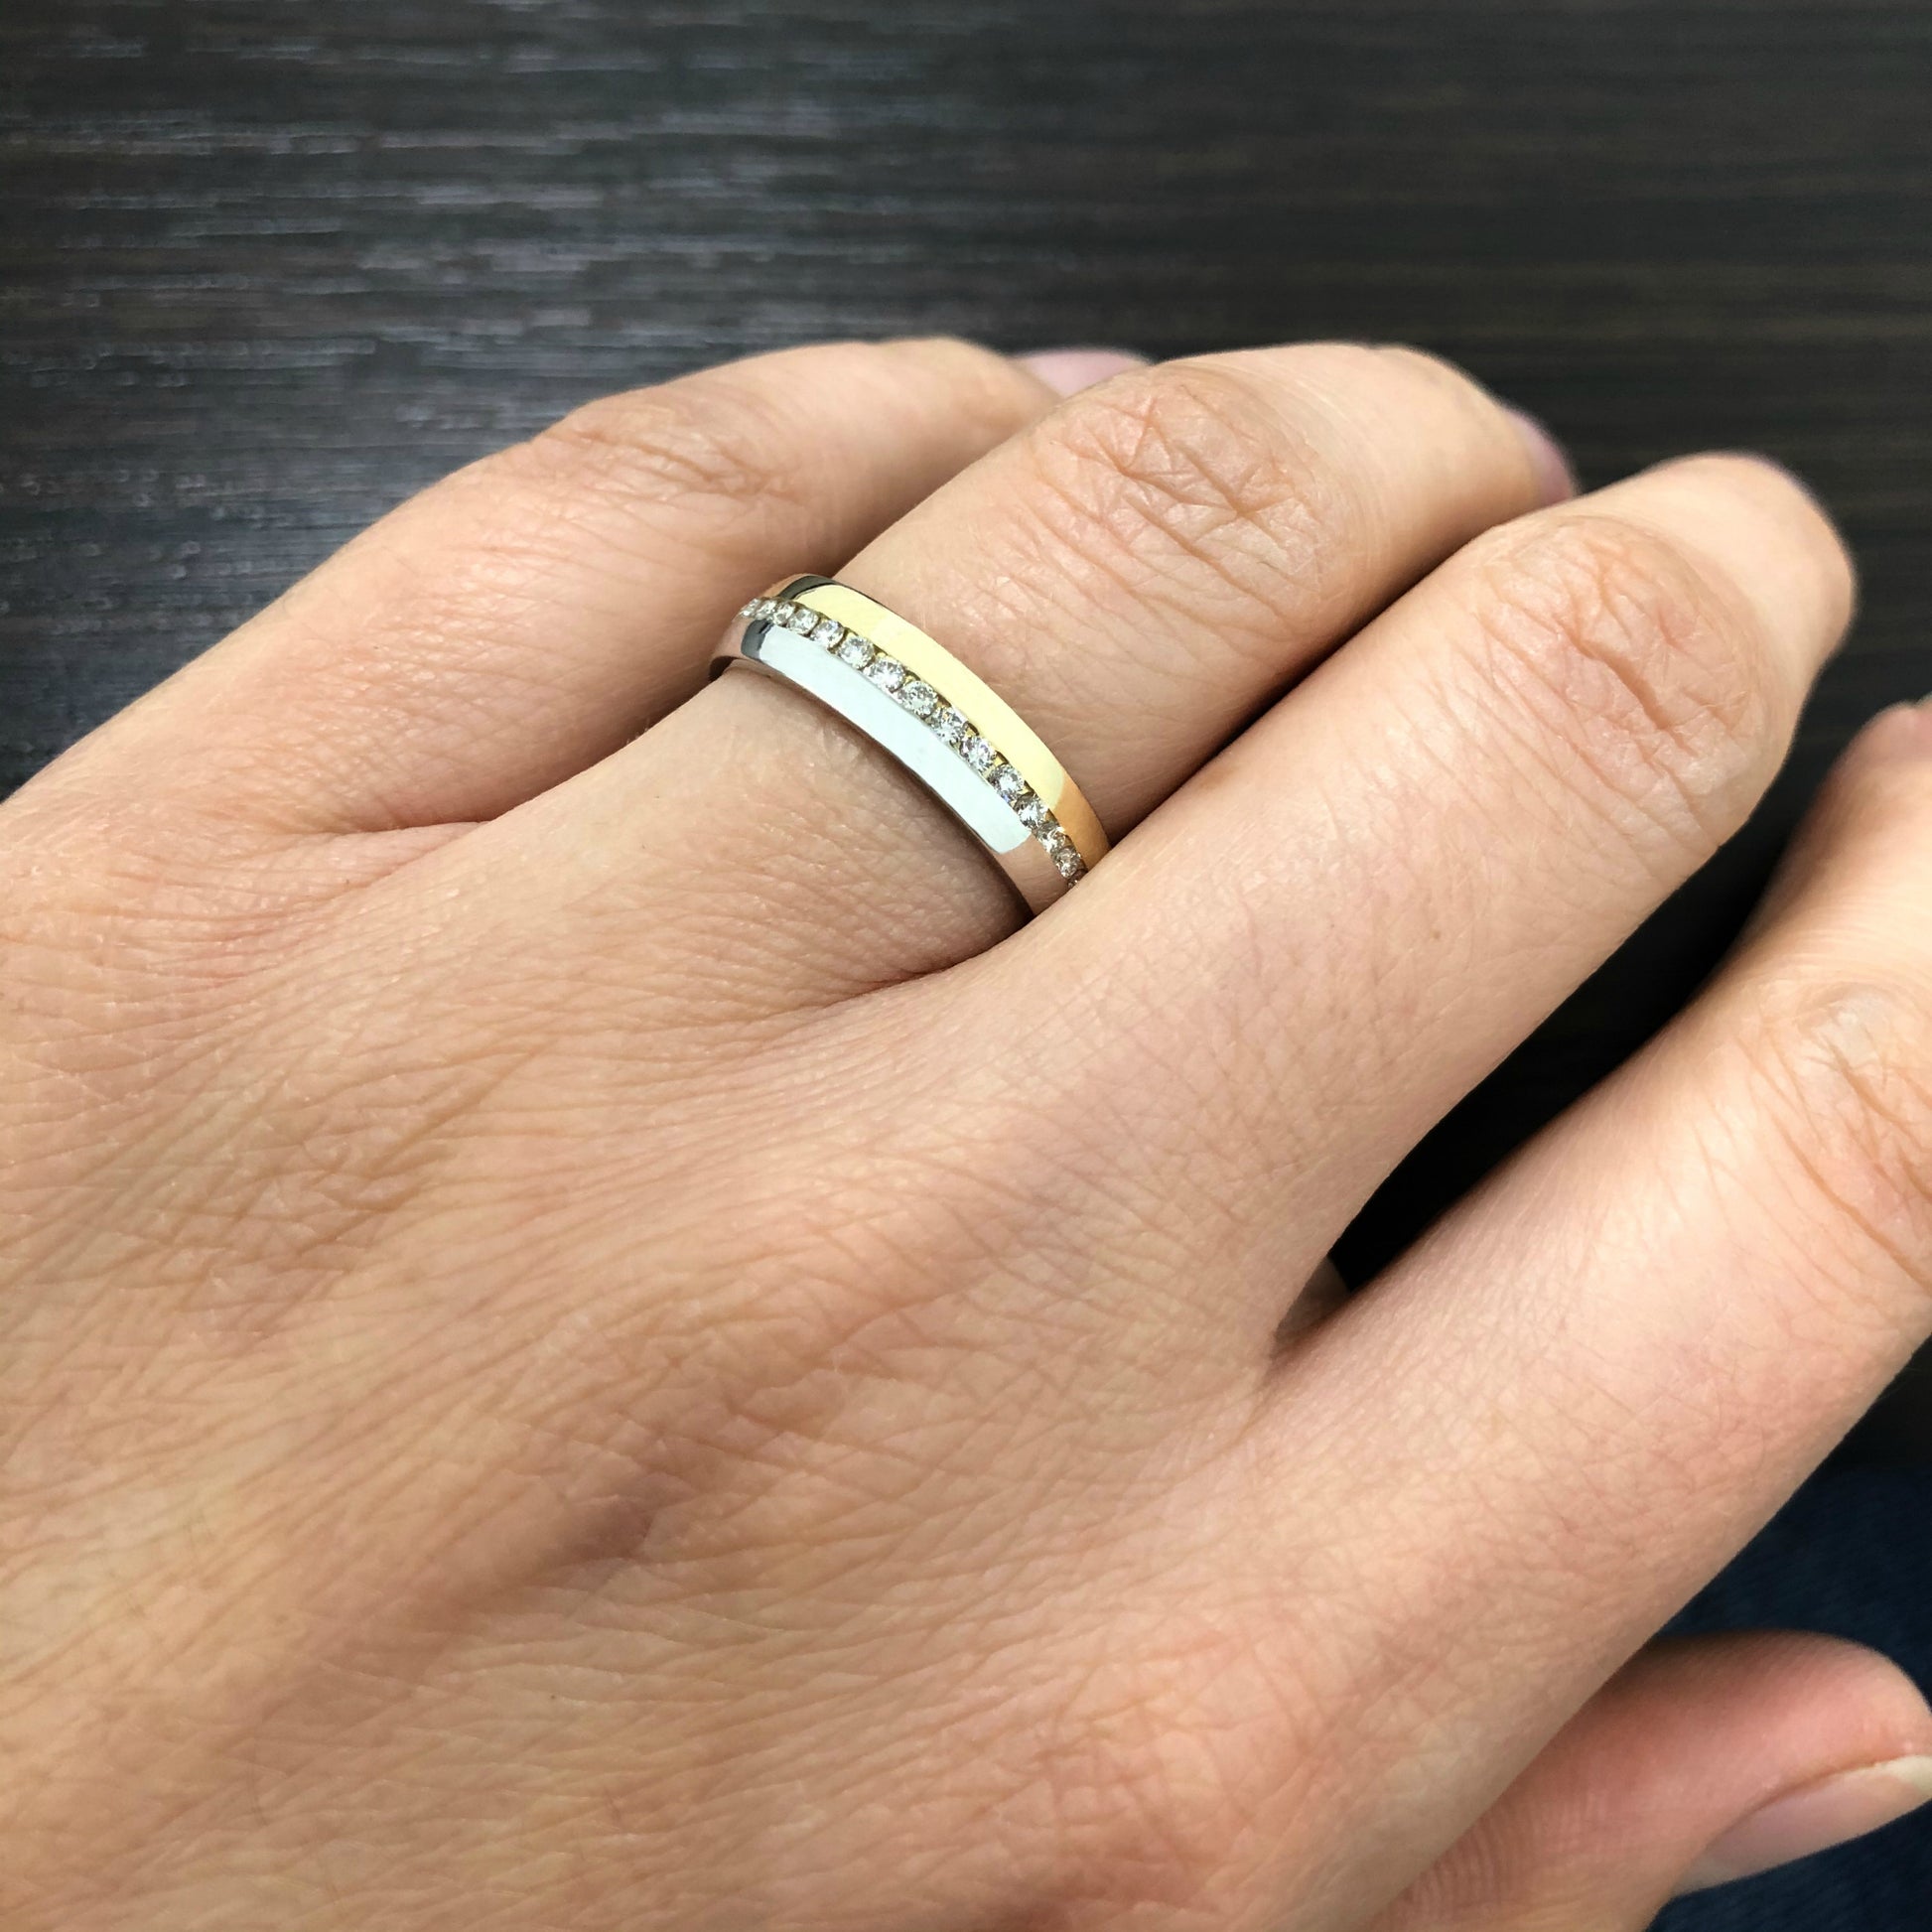 Gold wedding bands with diamonds. Two tone wedding bands. His and hers wedding rings set. Matching wedding bands. Gold wedding rings with diamonds